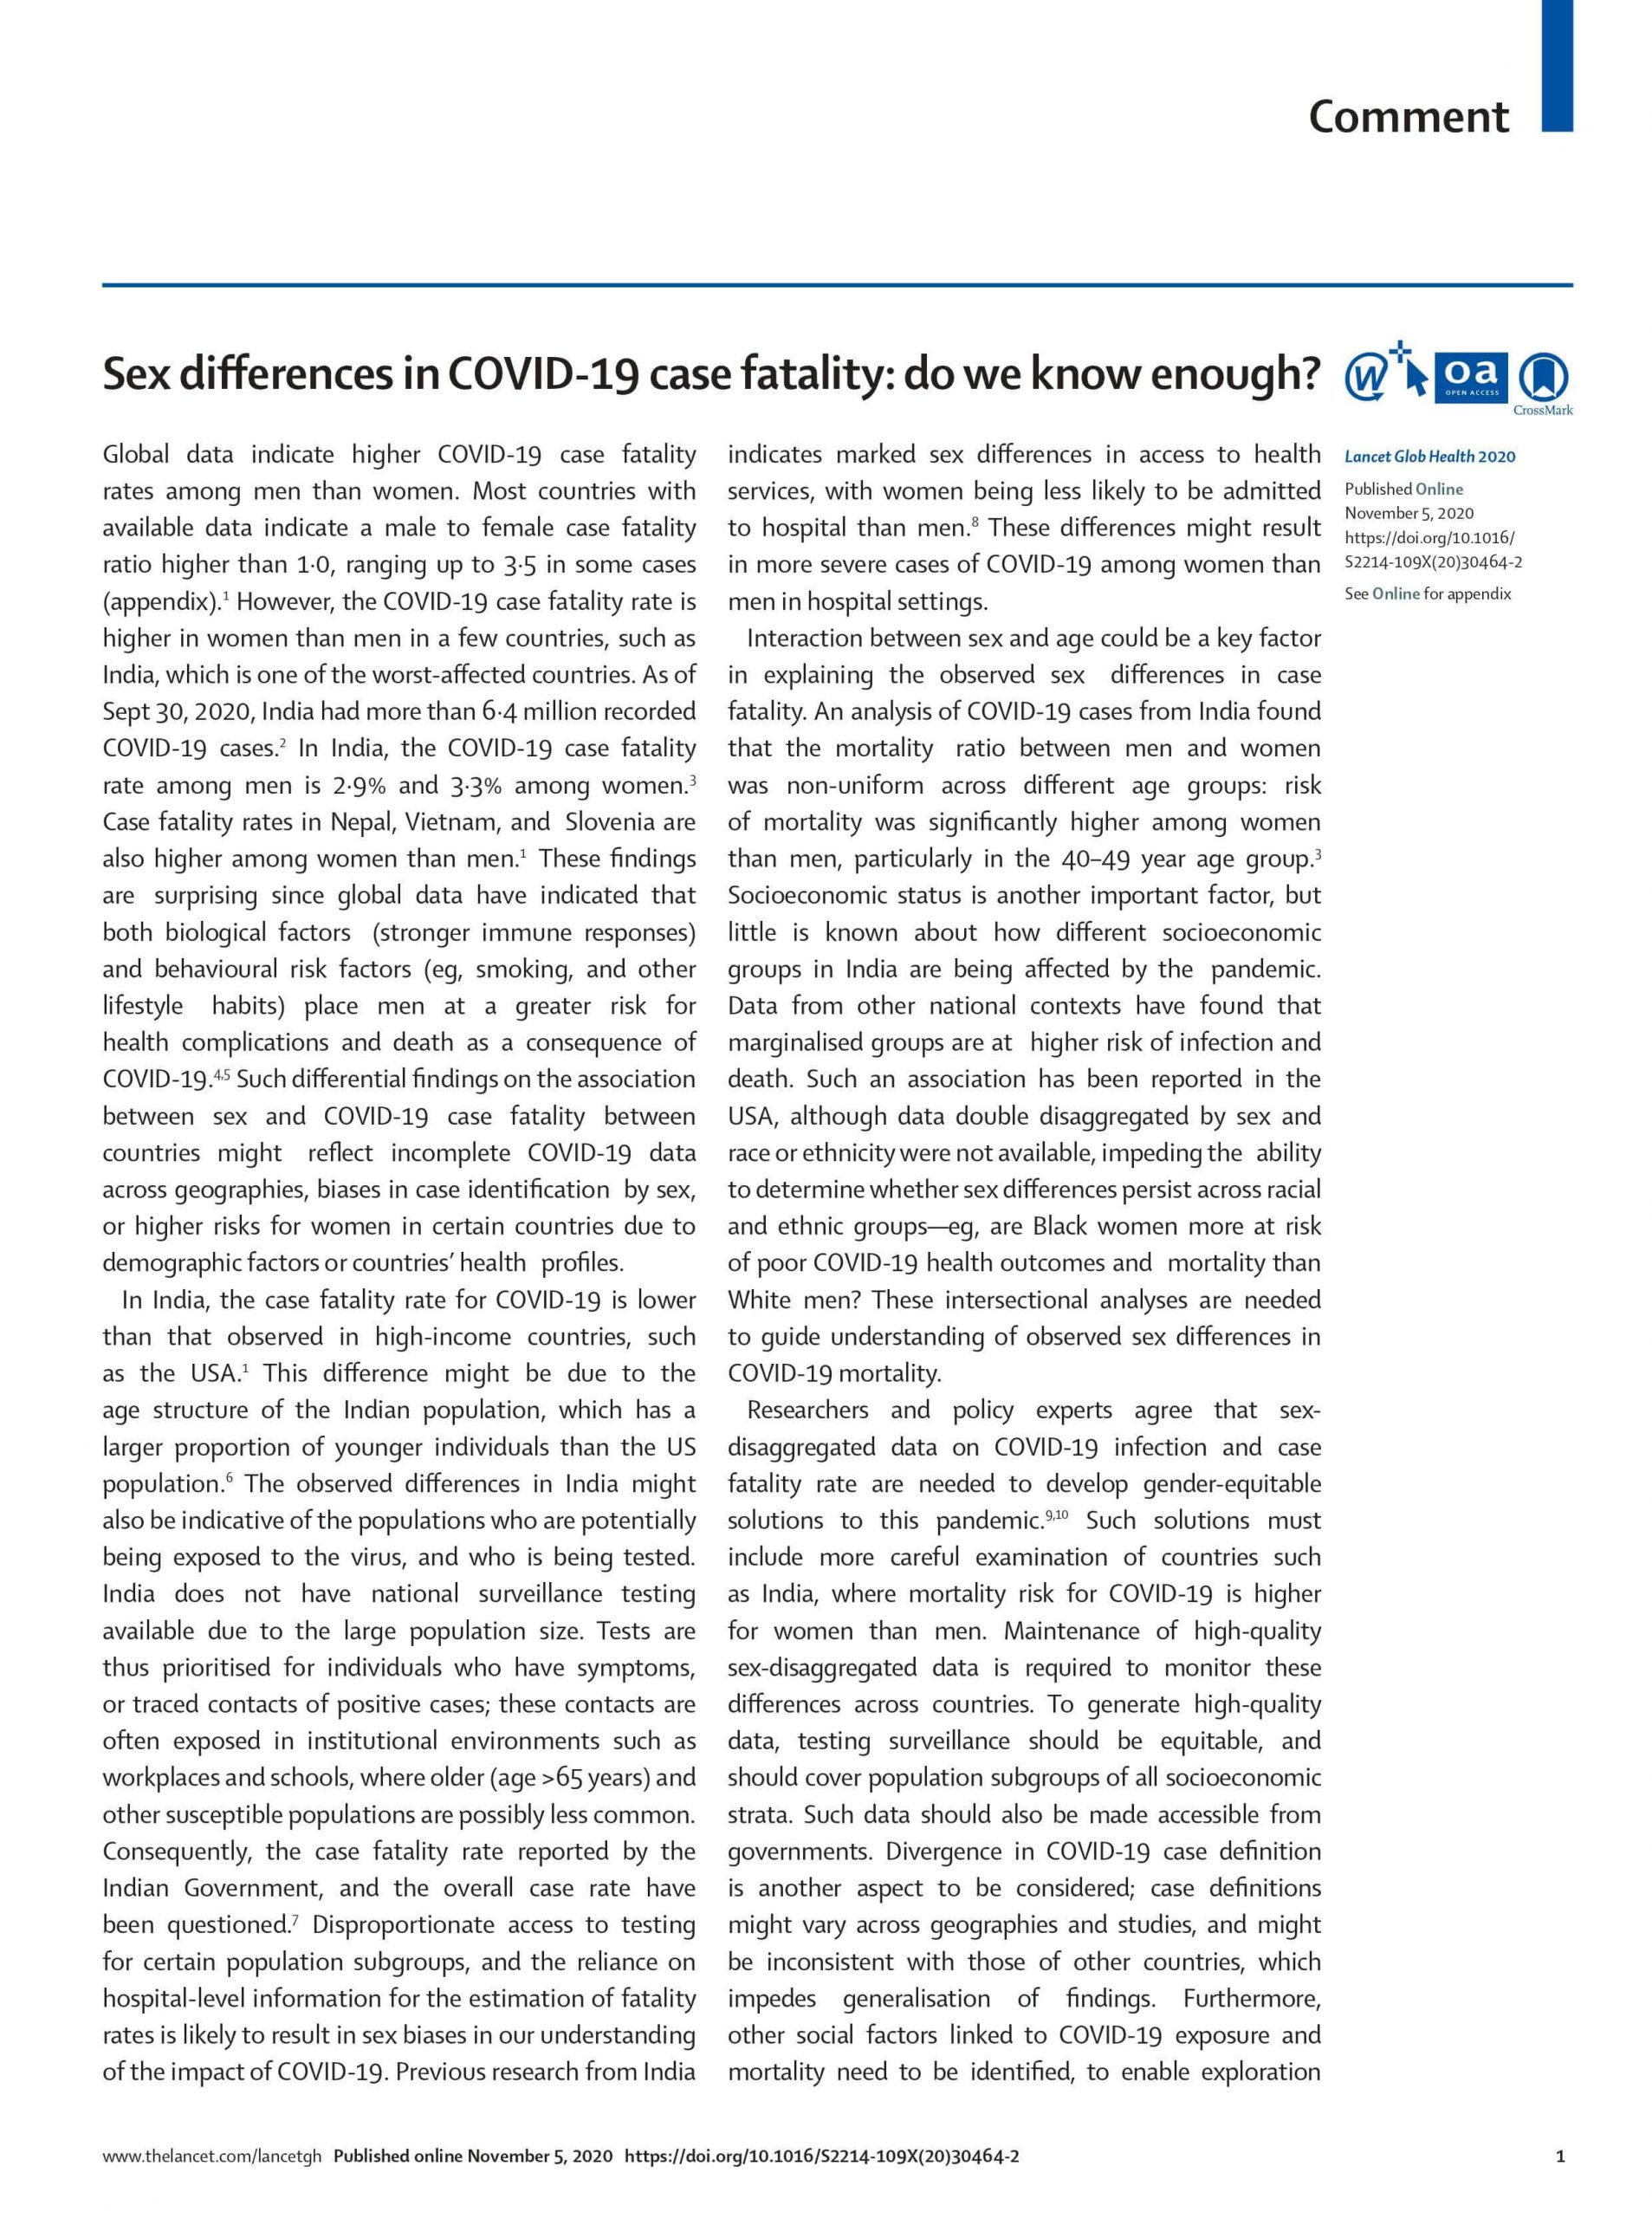 Sex differences in COVID-19 case fatality: do we know enough?